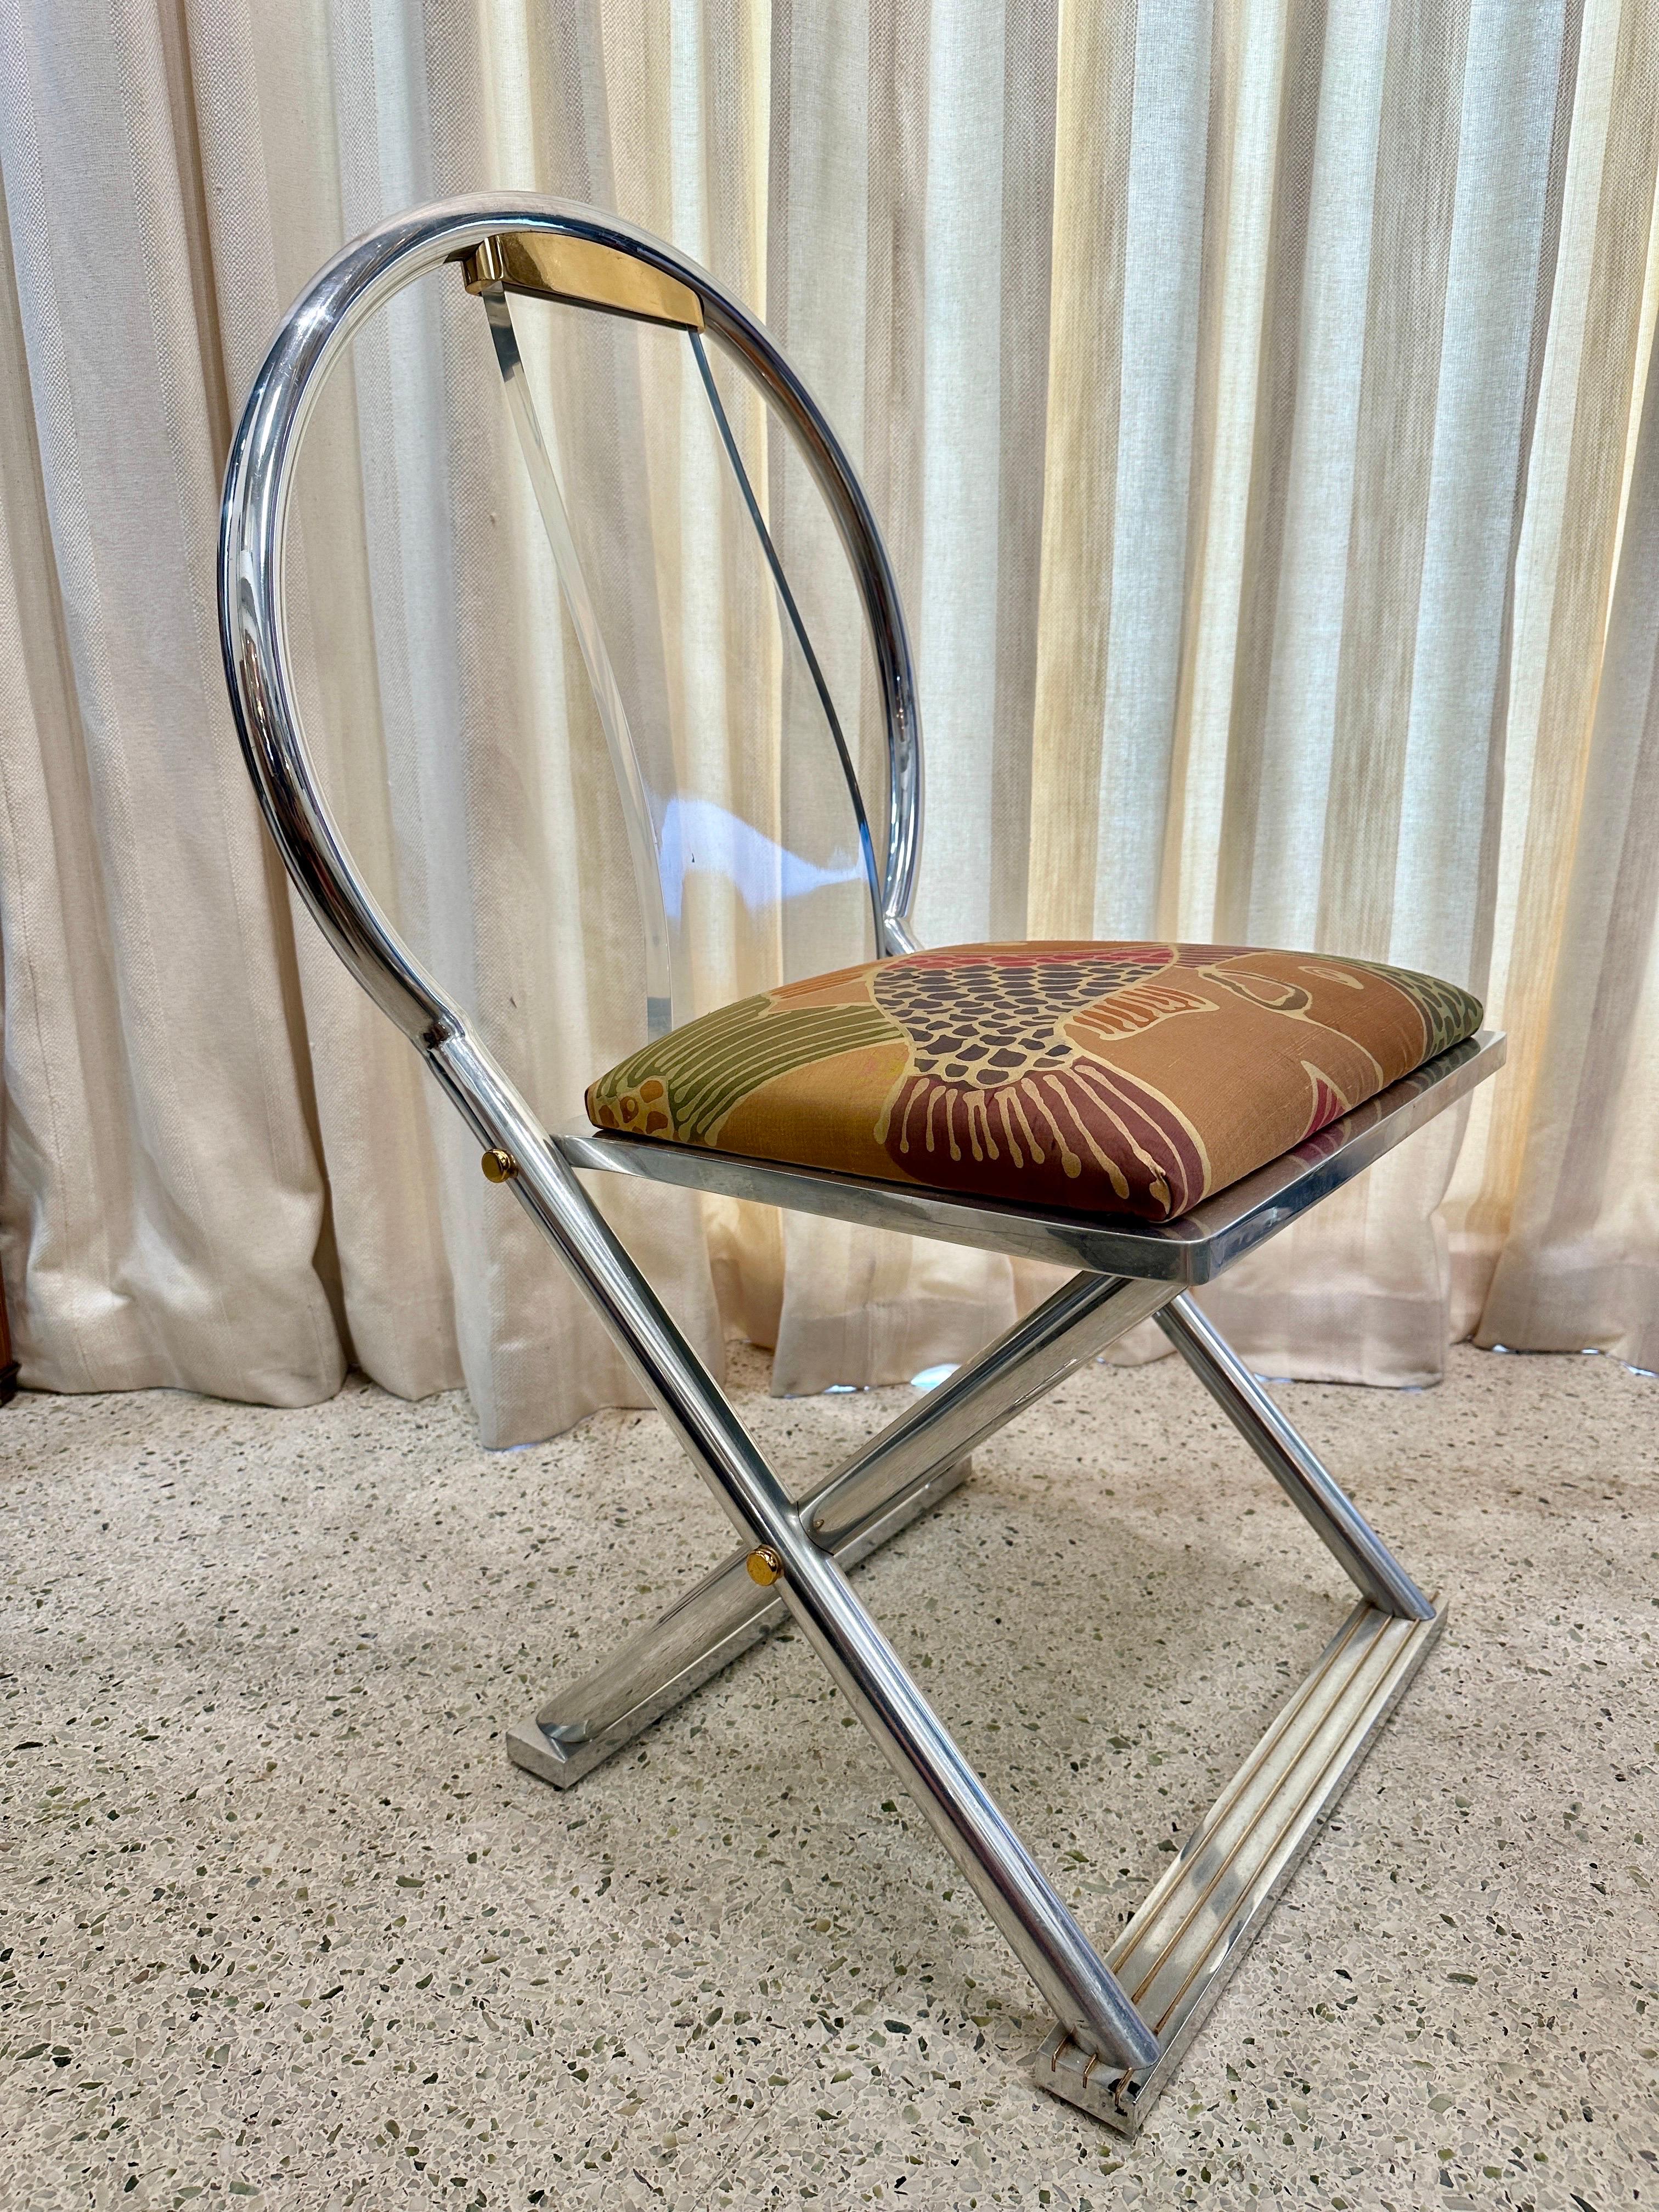 This documented rare chair by Karl Springer, found in his catalogue of original creations, is made of chrome-plated steel, brass and lucite. The seat cushion is upholstered in a fine silk with vibrant koi scene.